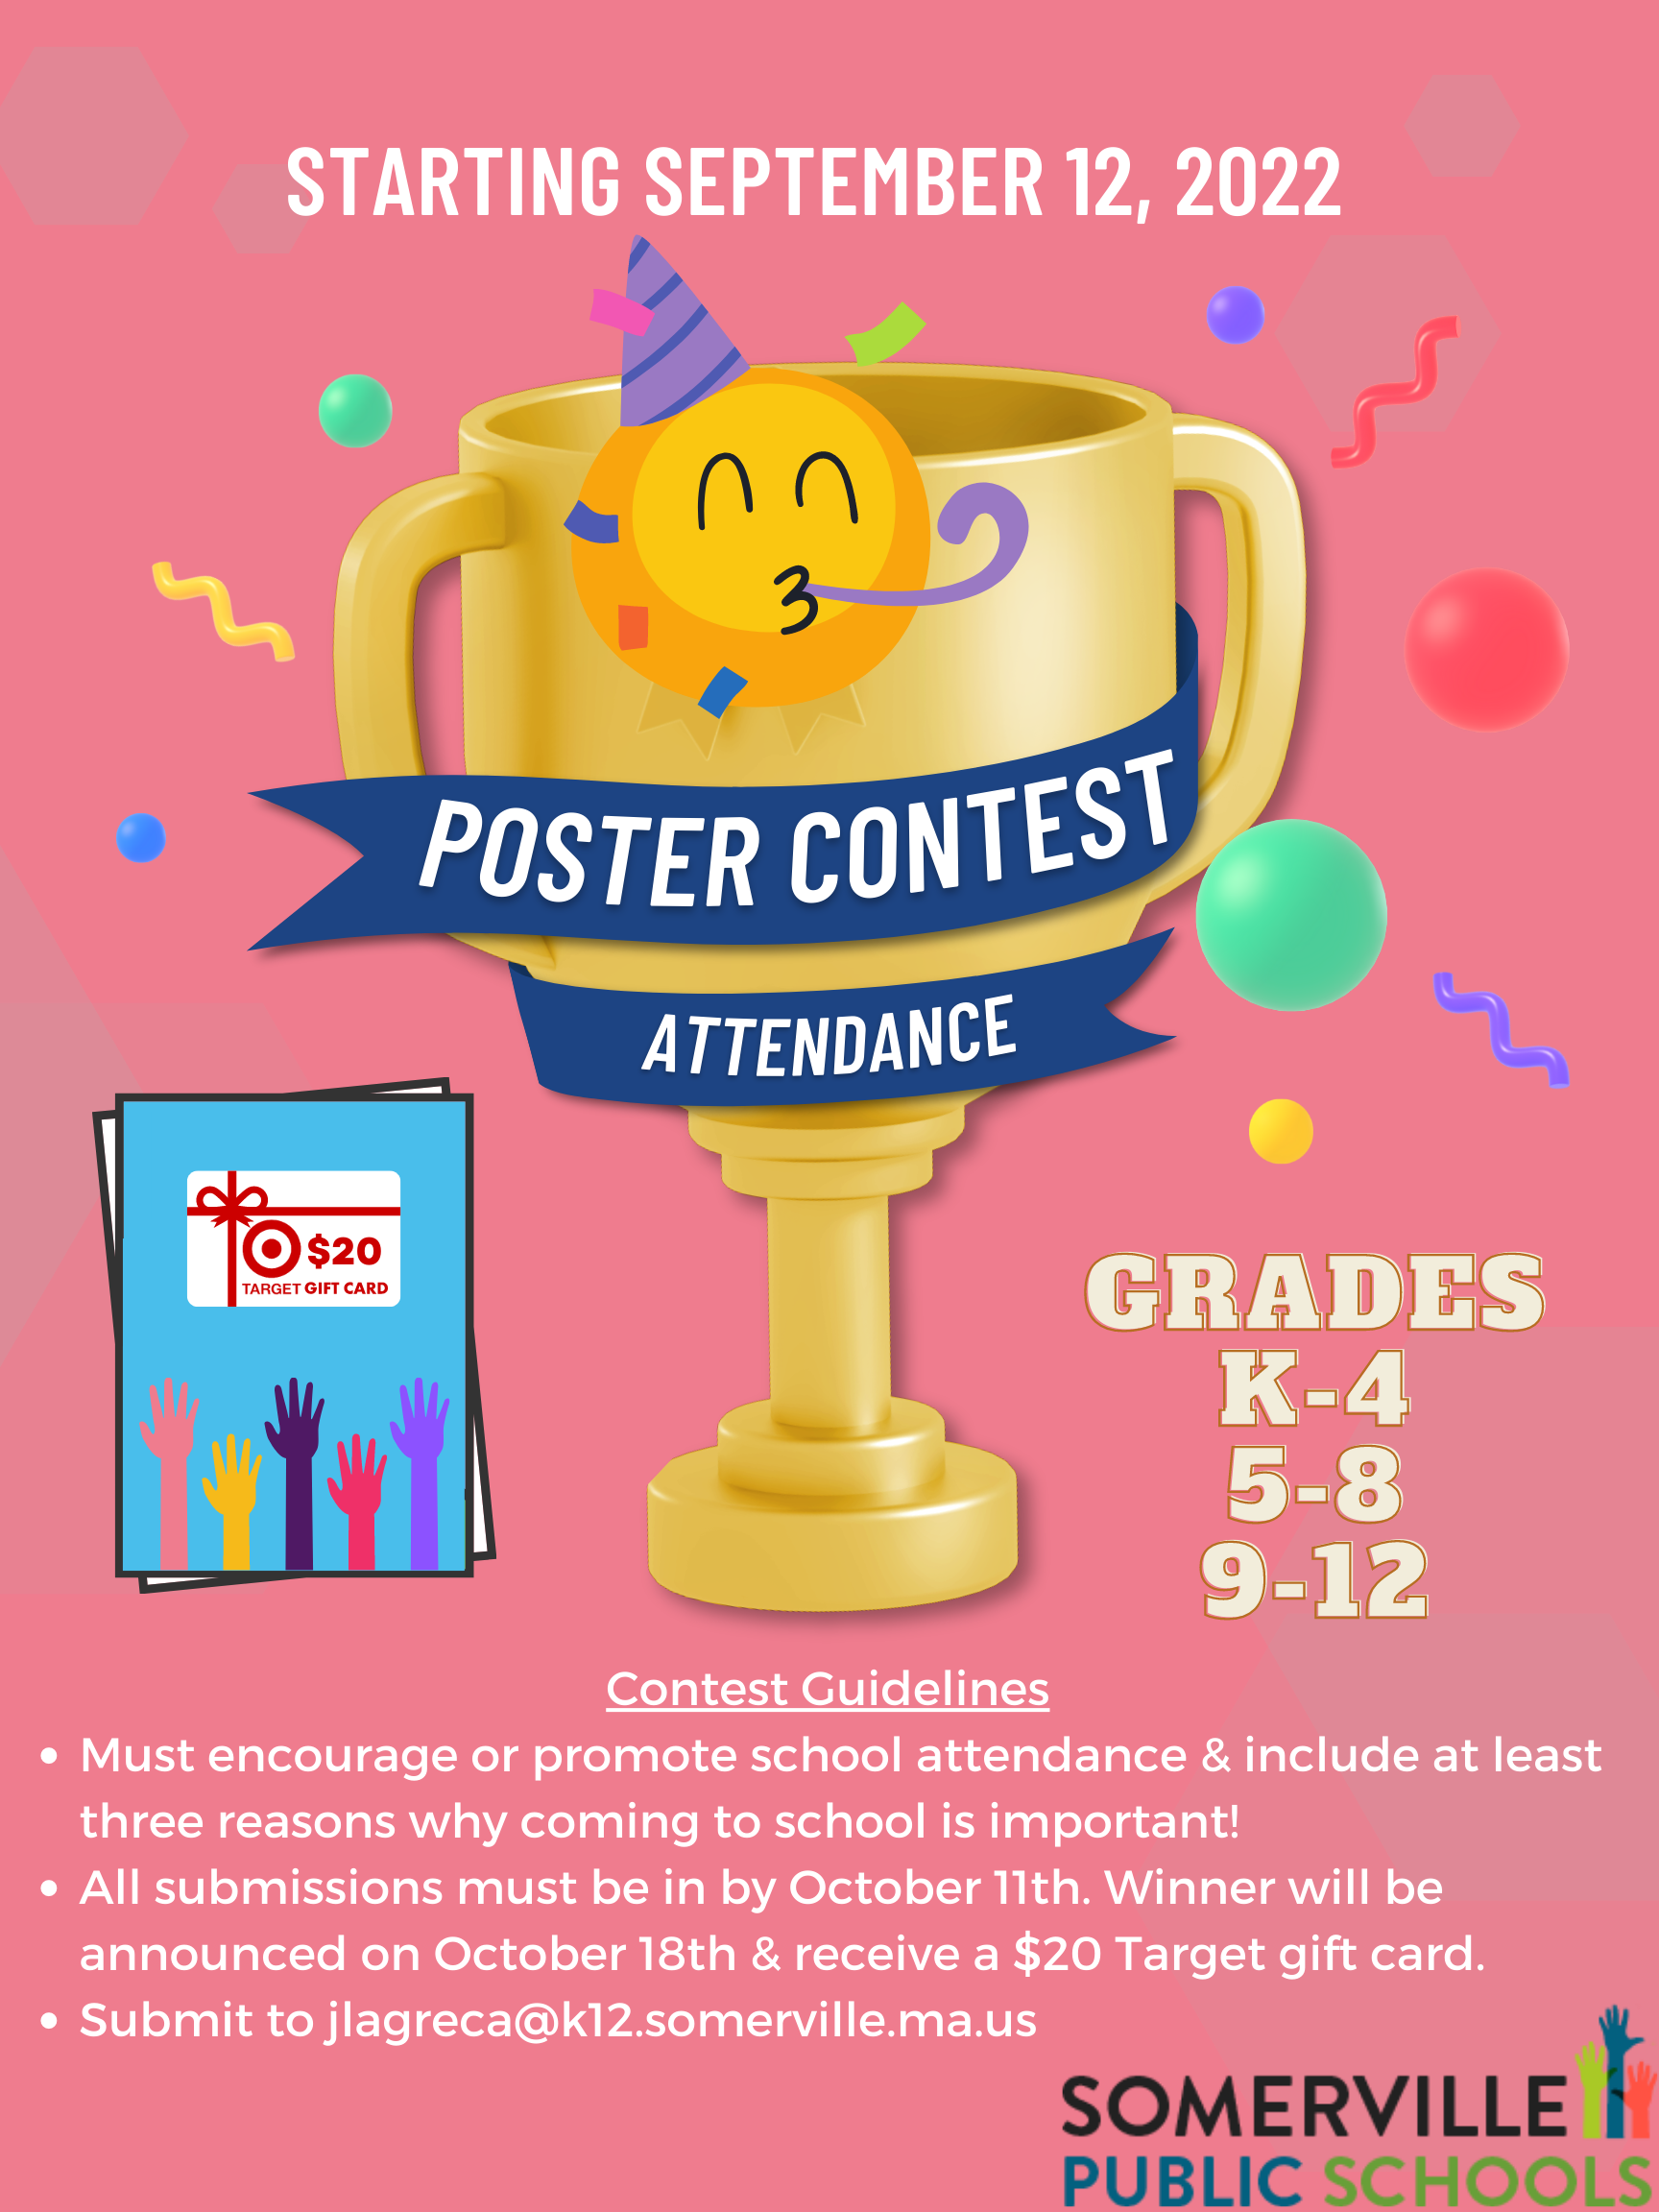 Poster contest image